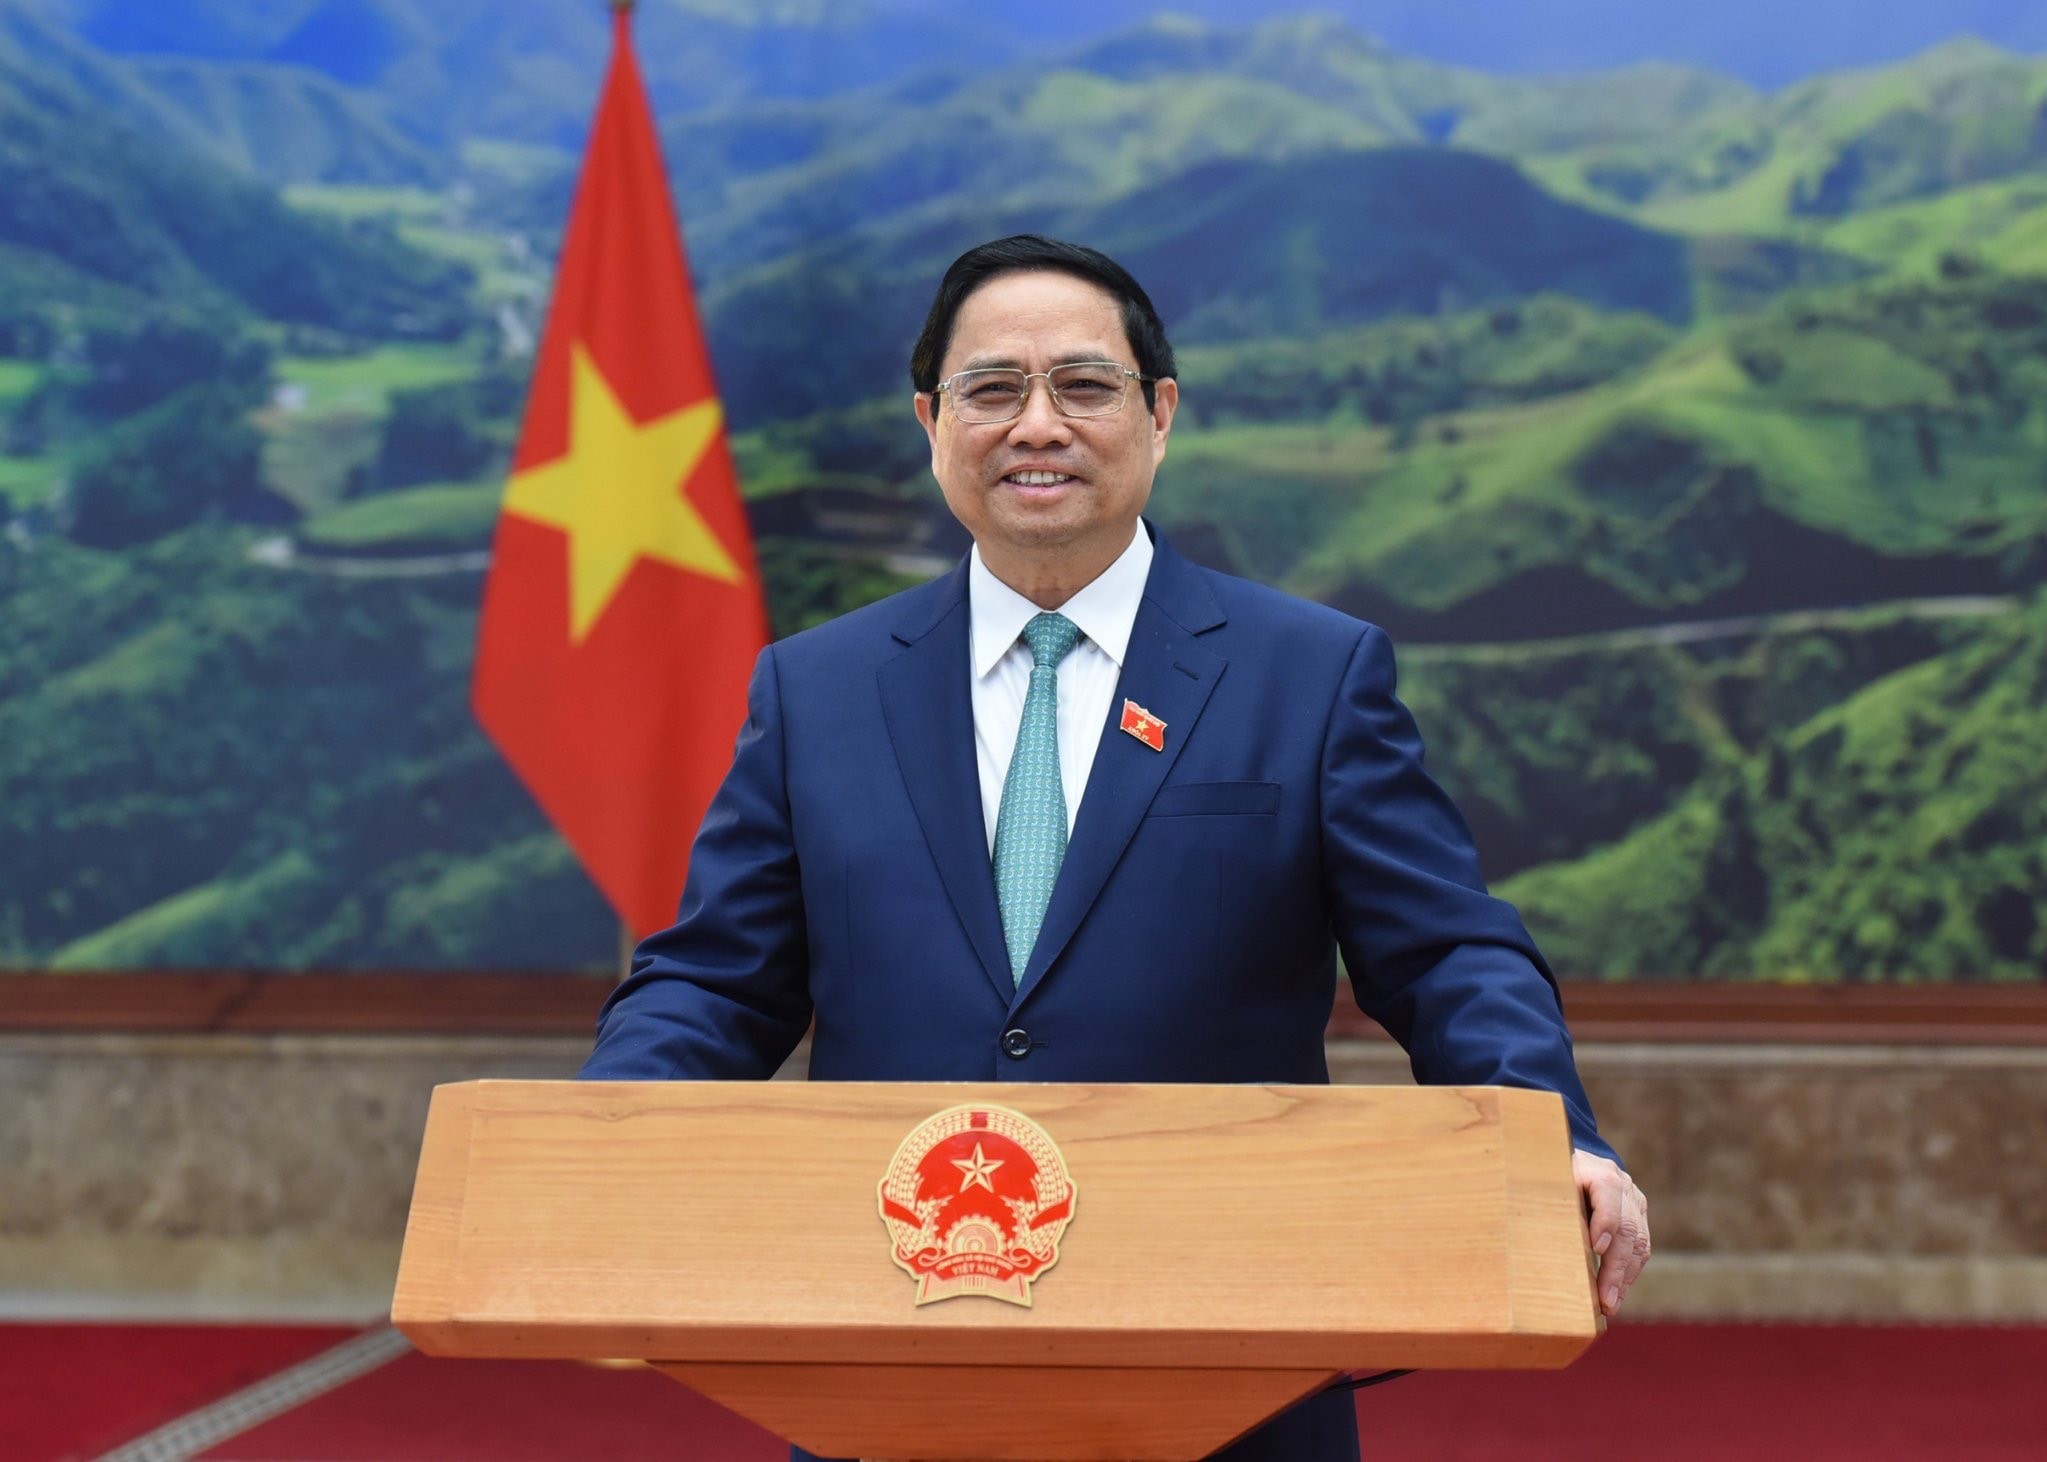 Prime Minister Pham Minh Chinh grants interview to Clever Group ahead of visit to Romania